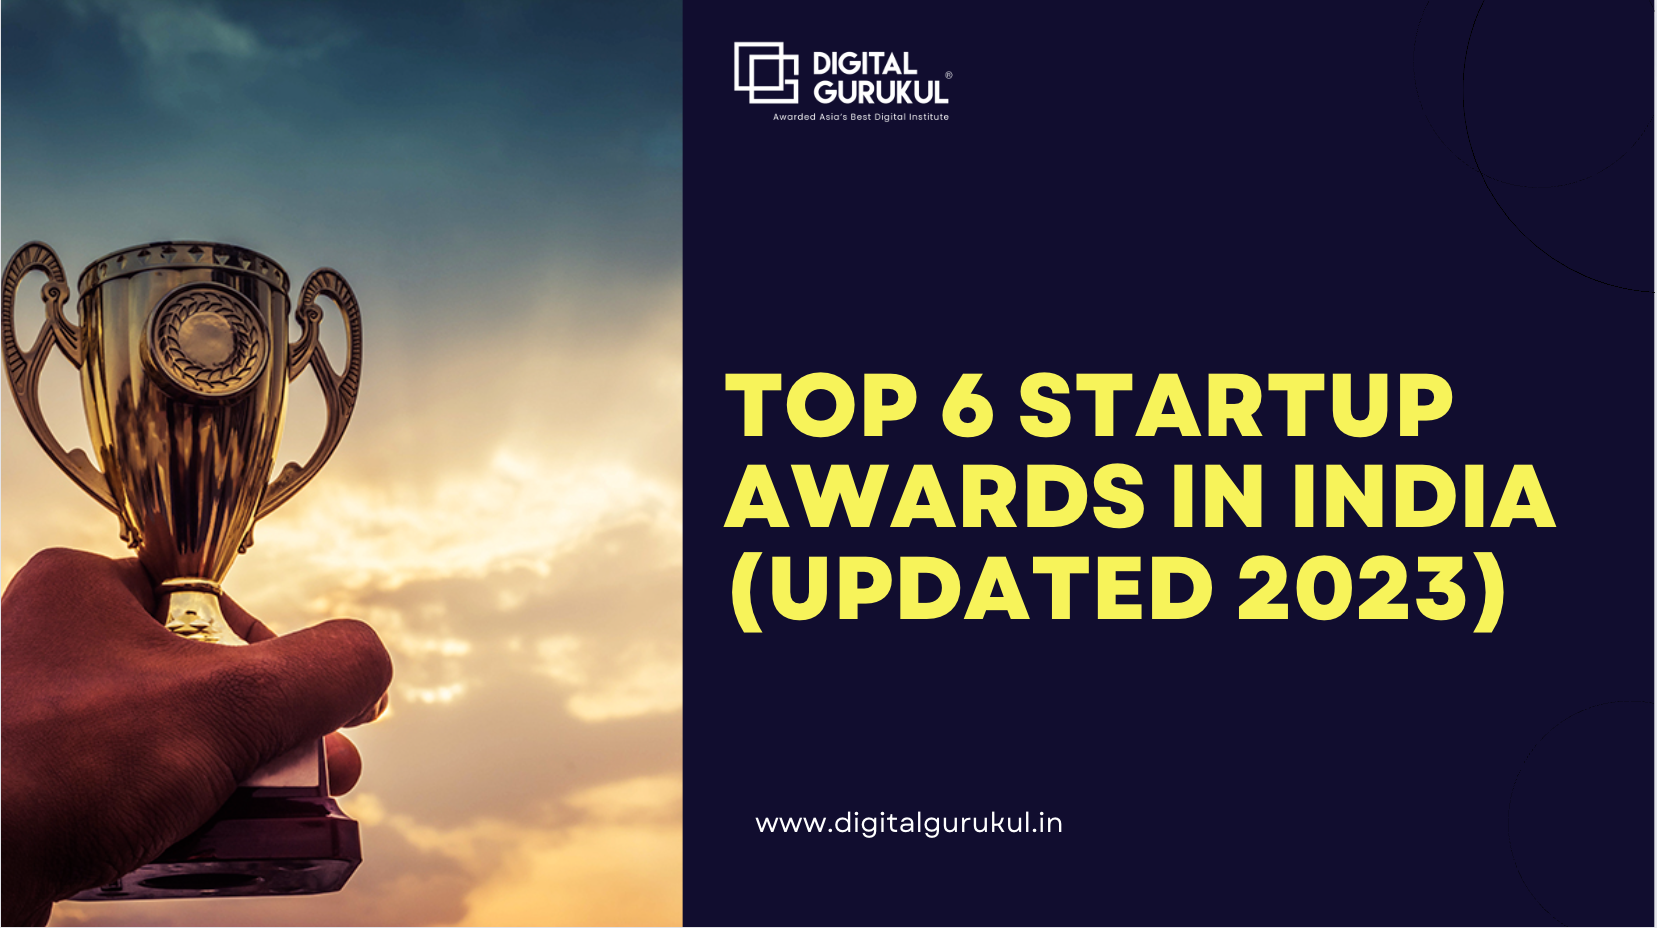 Top 6 startup awards in India (Updated 2023)